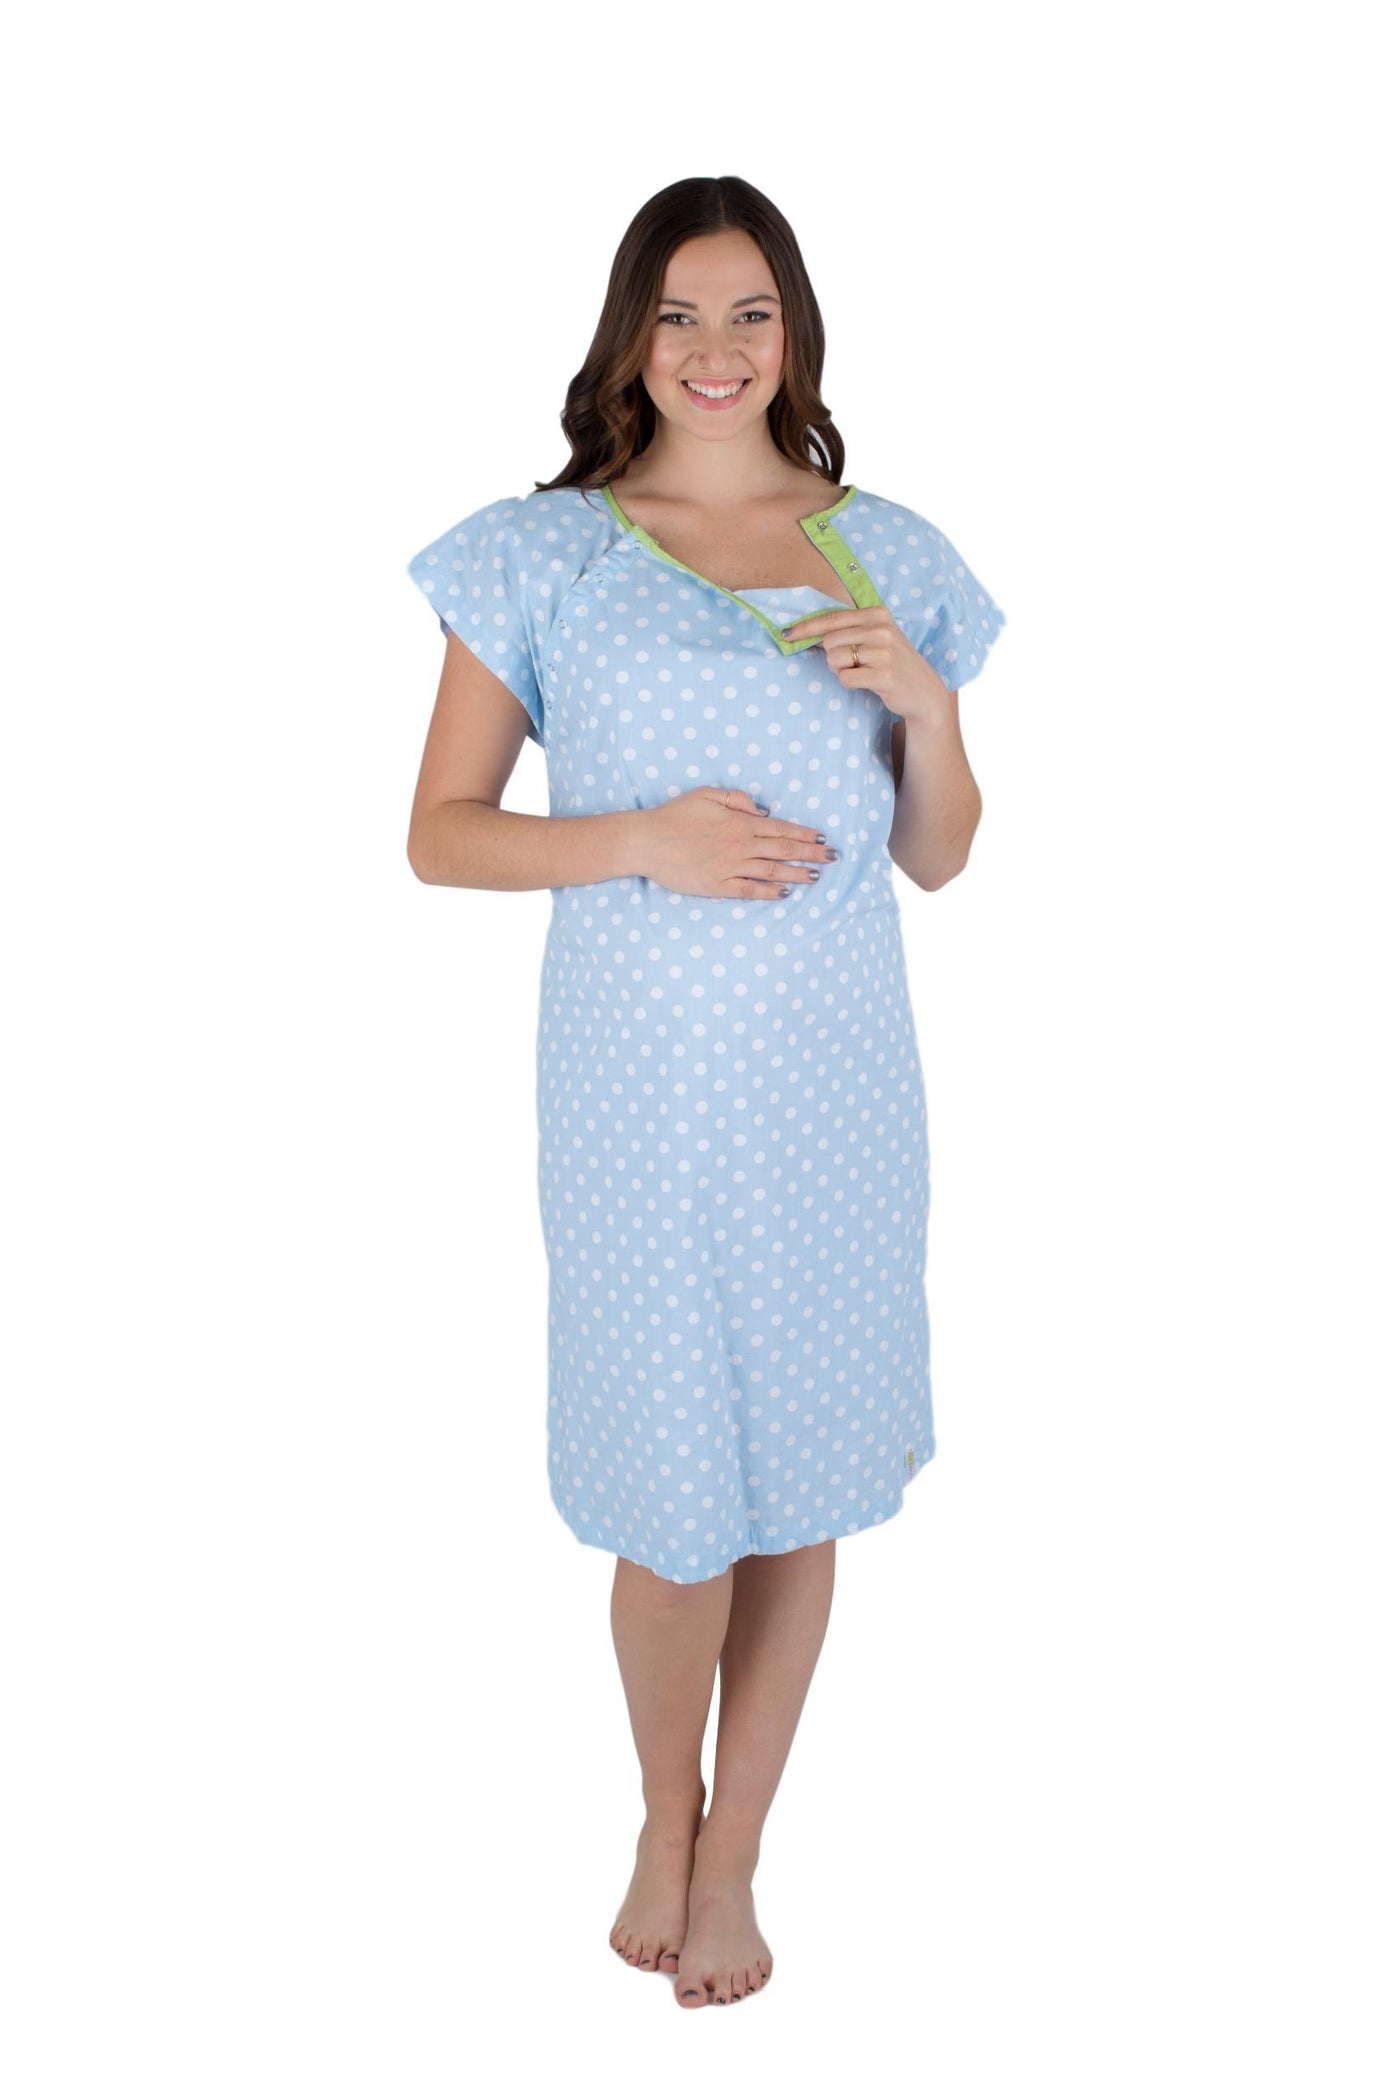 Nicole Gownie Maternity Delivery Labor Hospital Birthing Gown